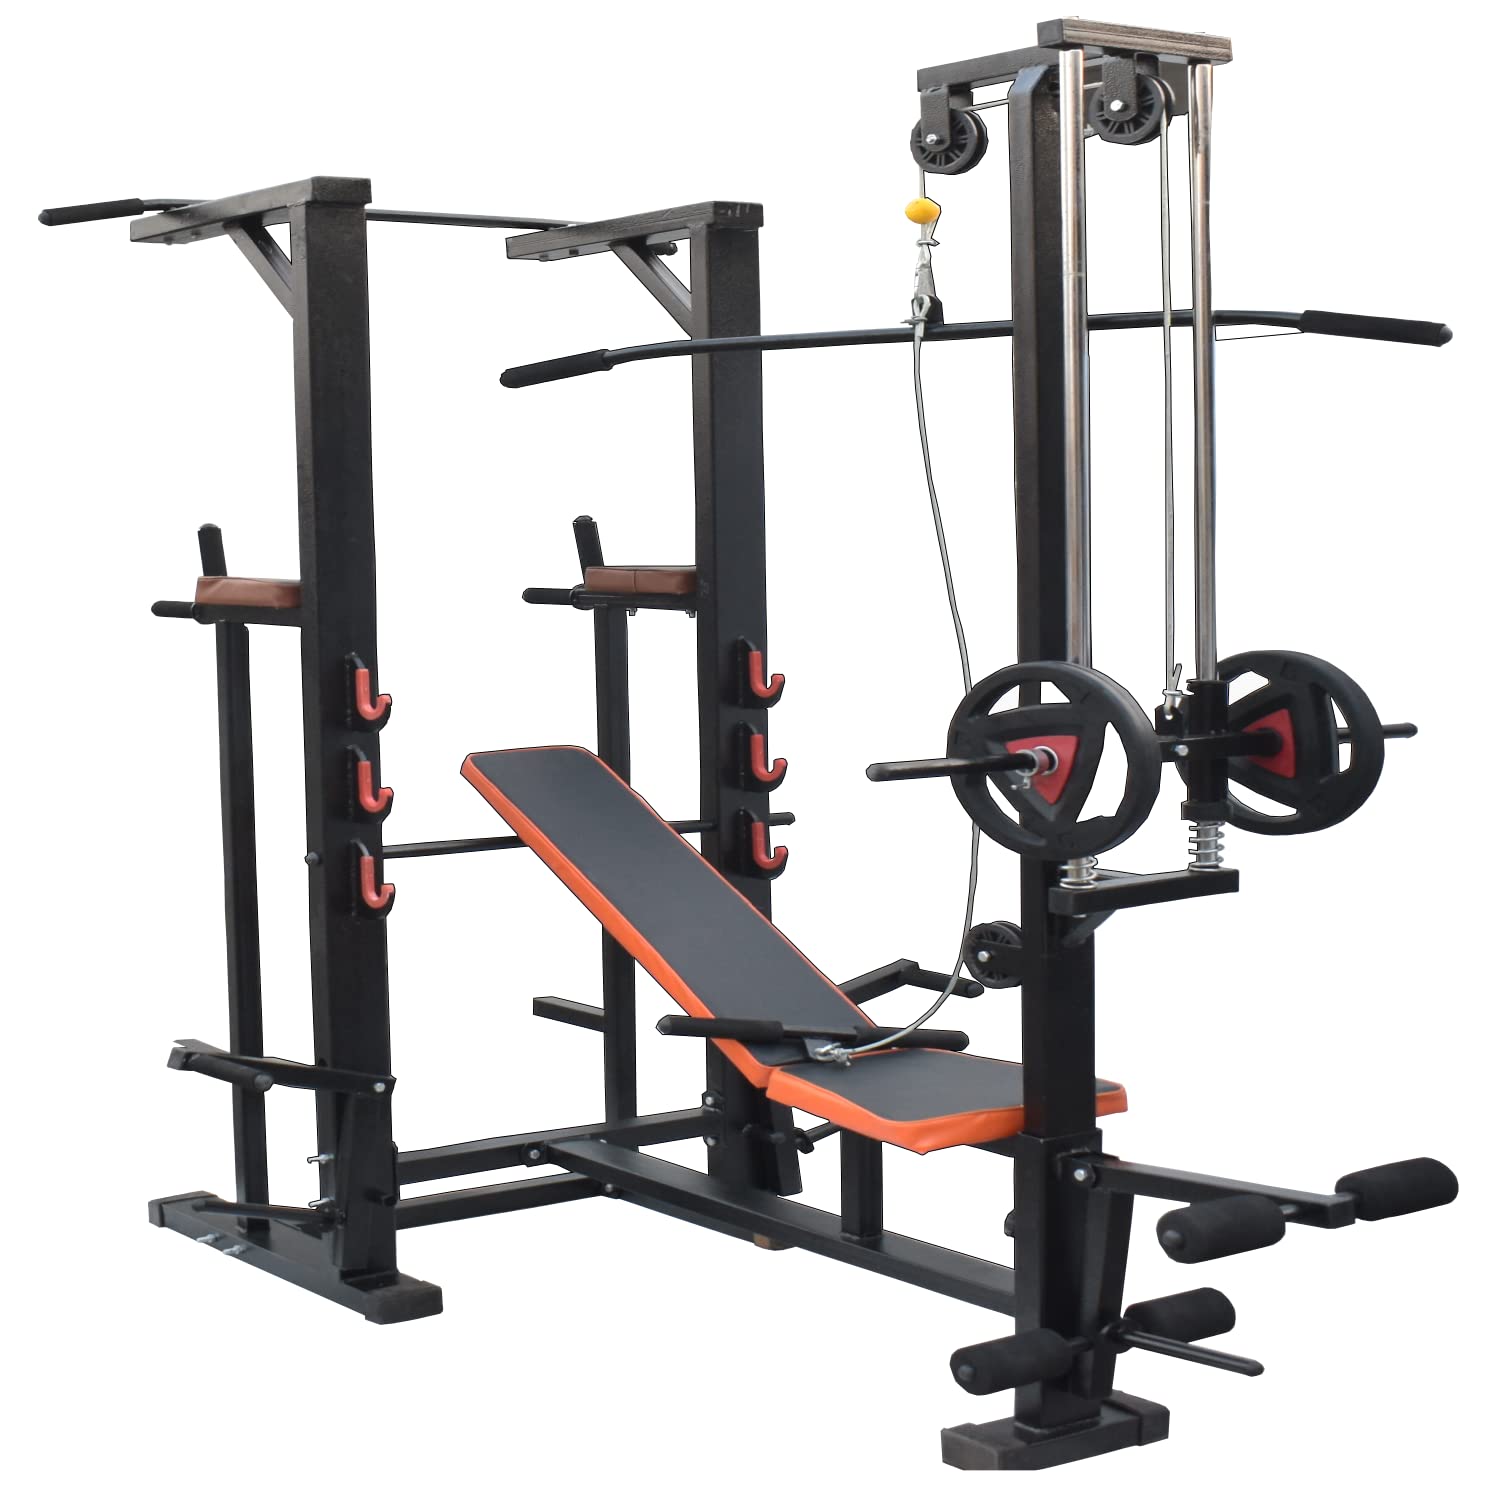 ABS Tower with 20 in 1 Gym Bench & Push up dips Workout Home Gym